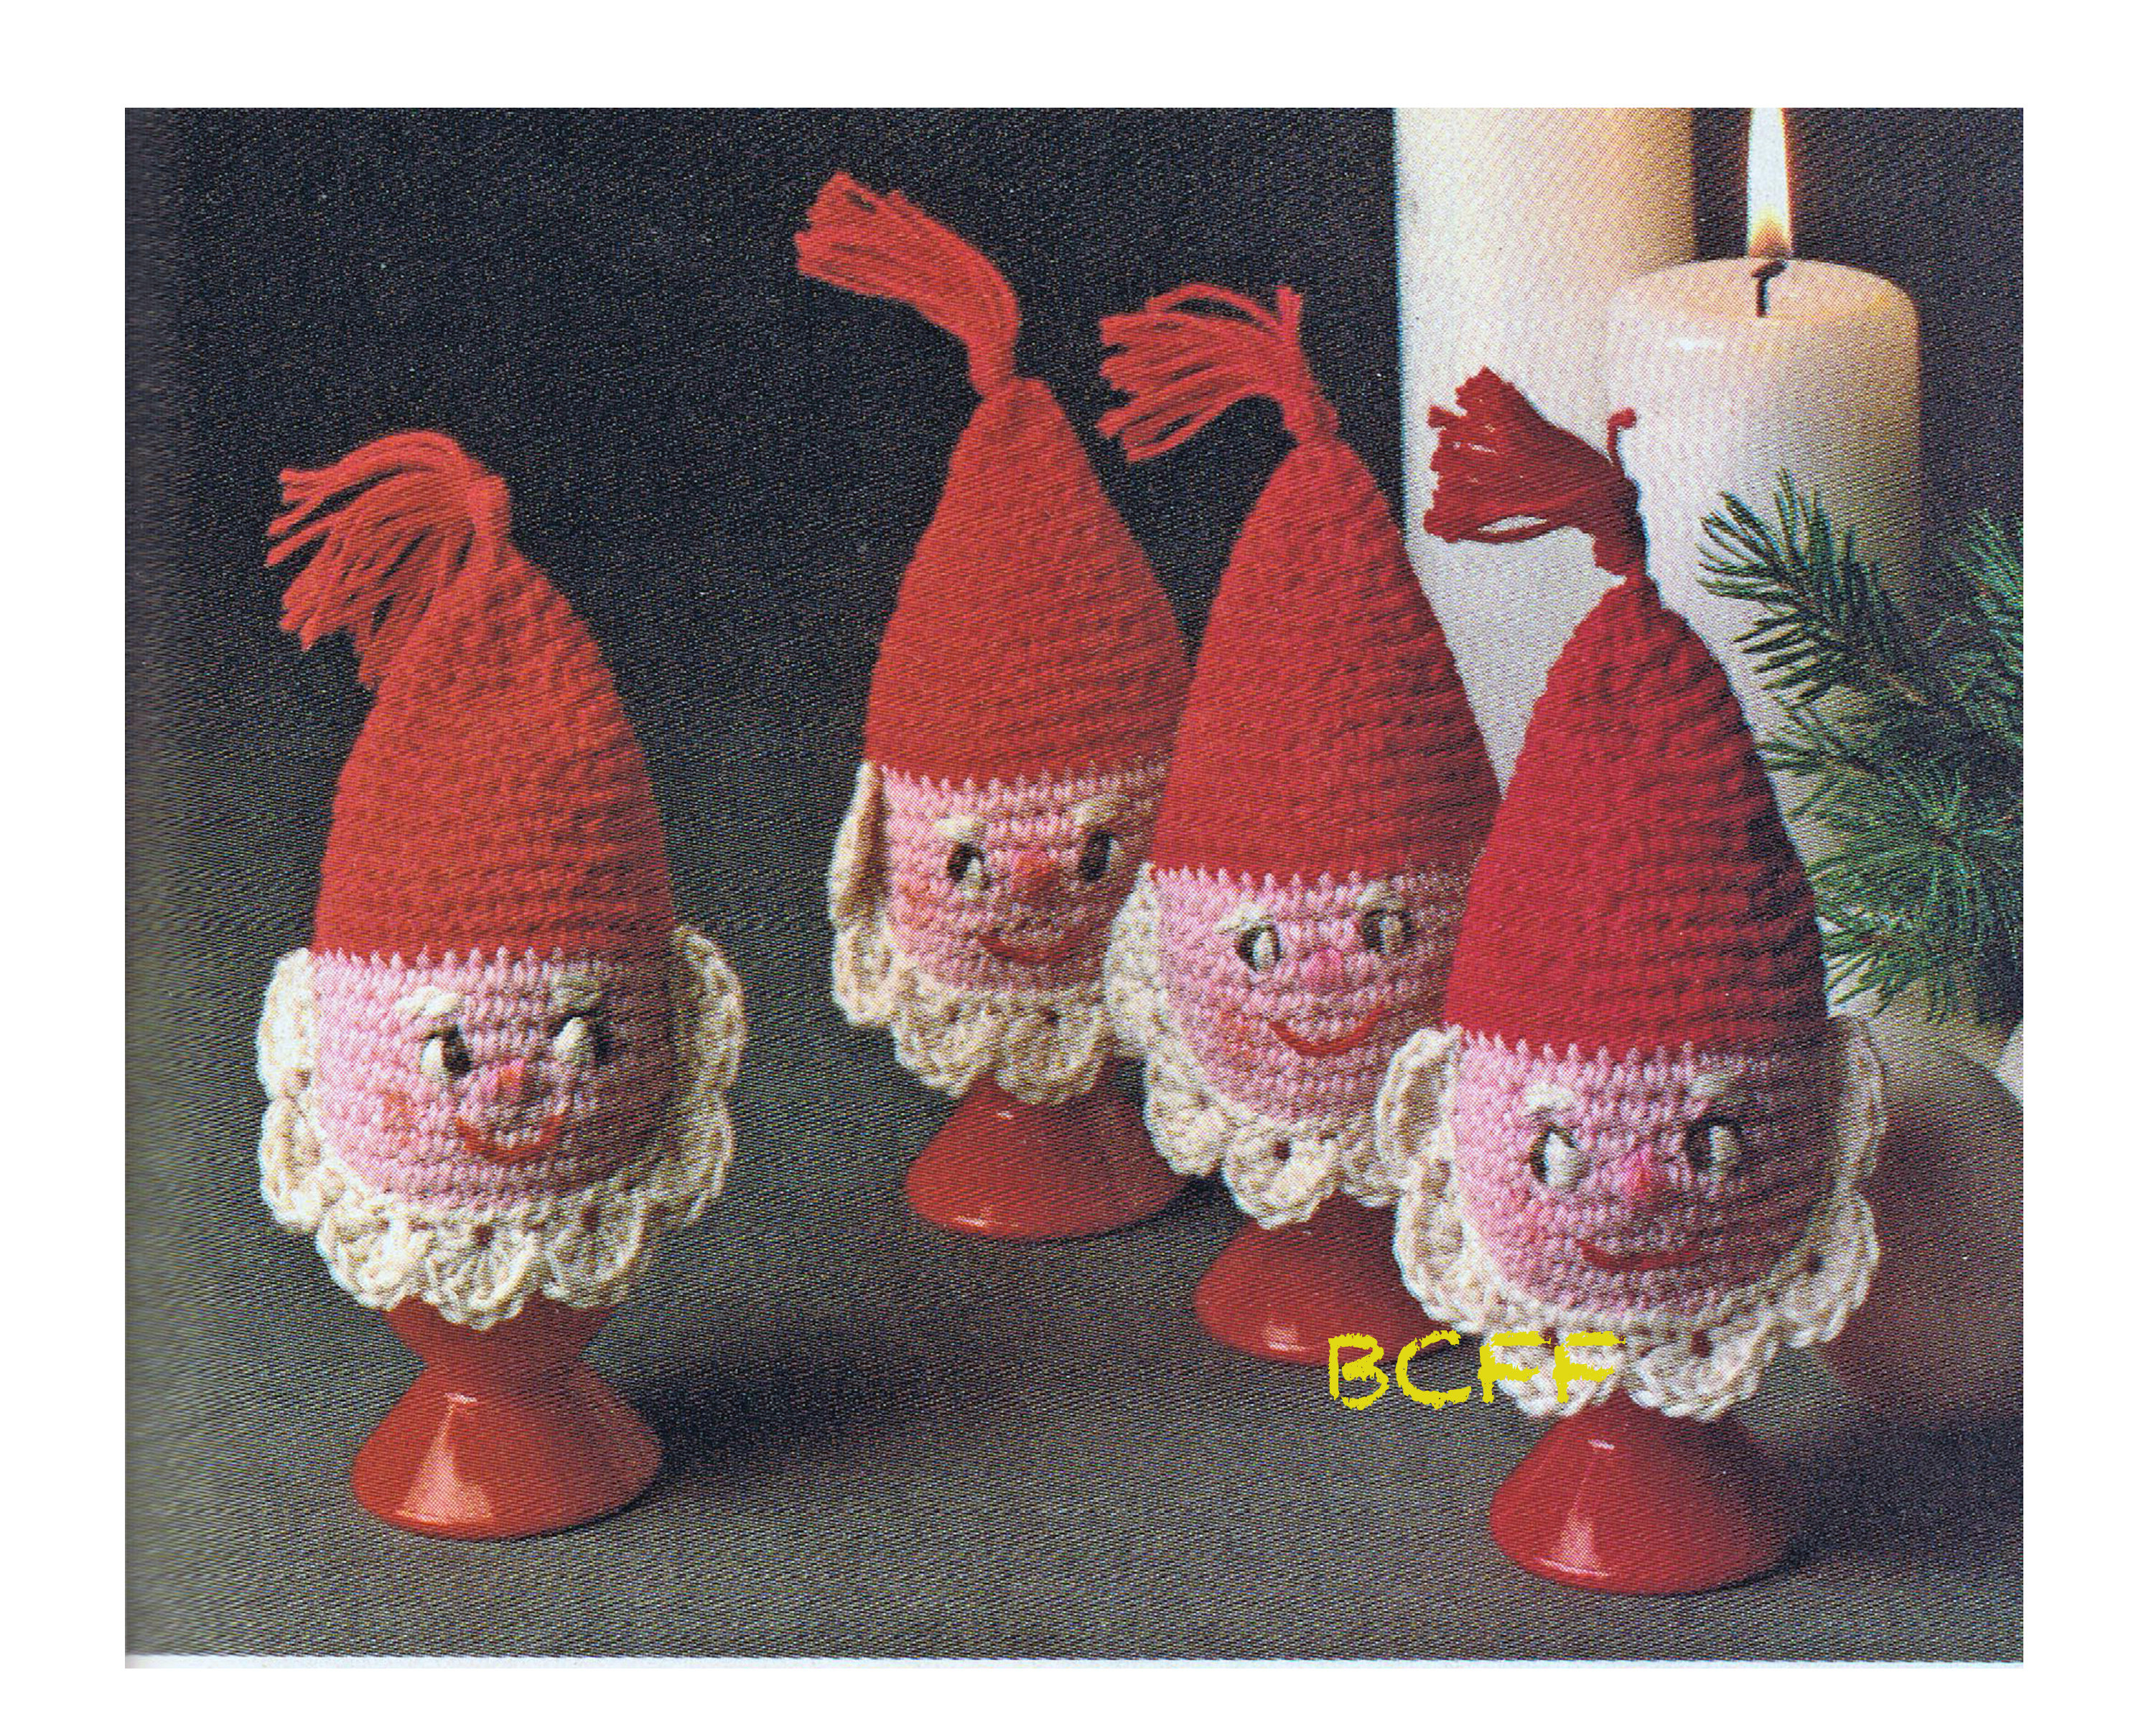 Crochet With Embroidery Floss Patterns Crochet Egg Cozies Christmas Santa Cozies Egg Warmers Santa Egg Warmers Pdf Crochet Pattern